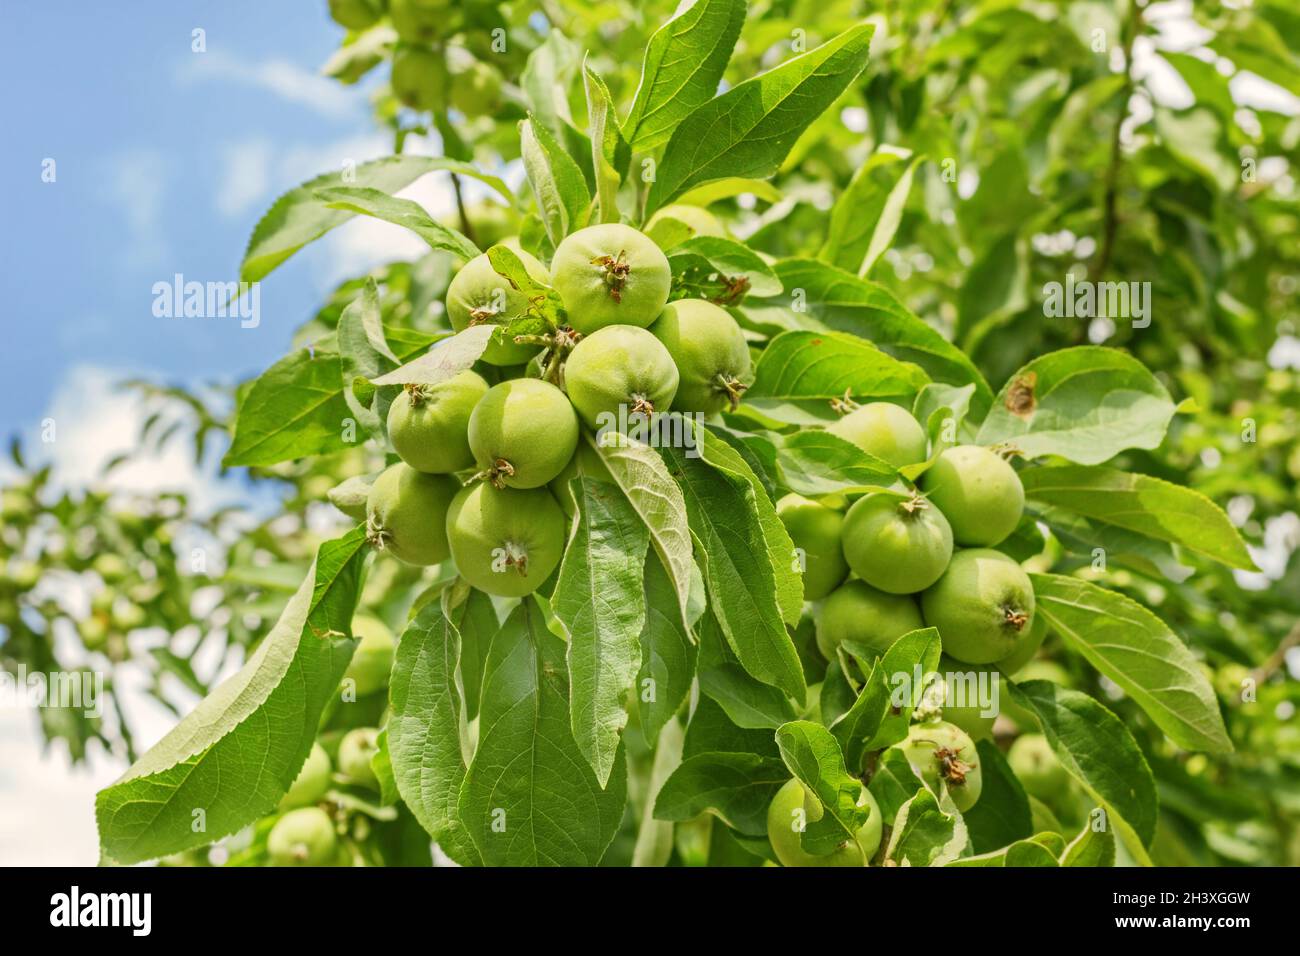 Real green unripe apples on tree branch on sunny day Stock Photo